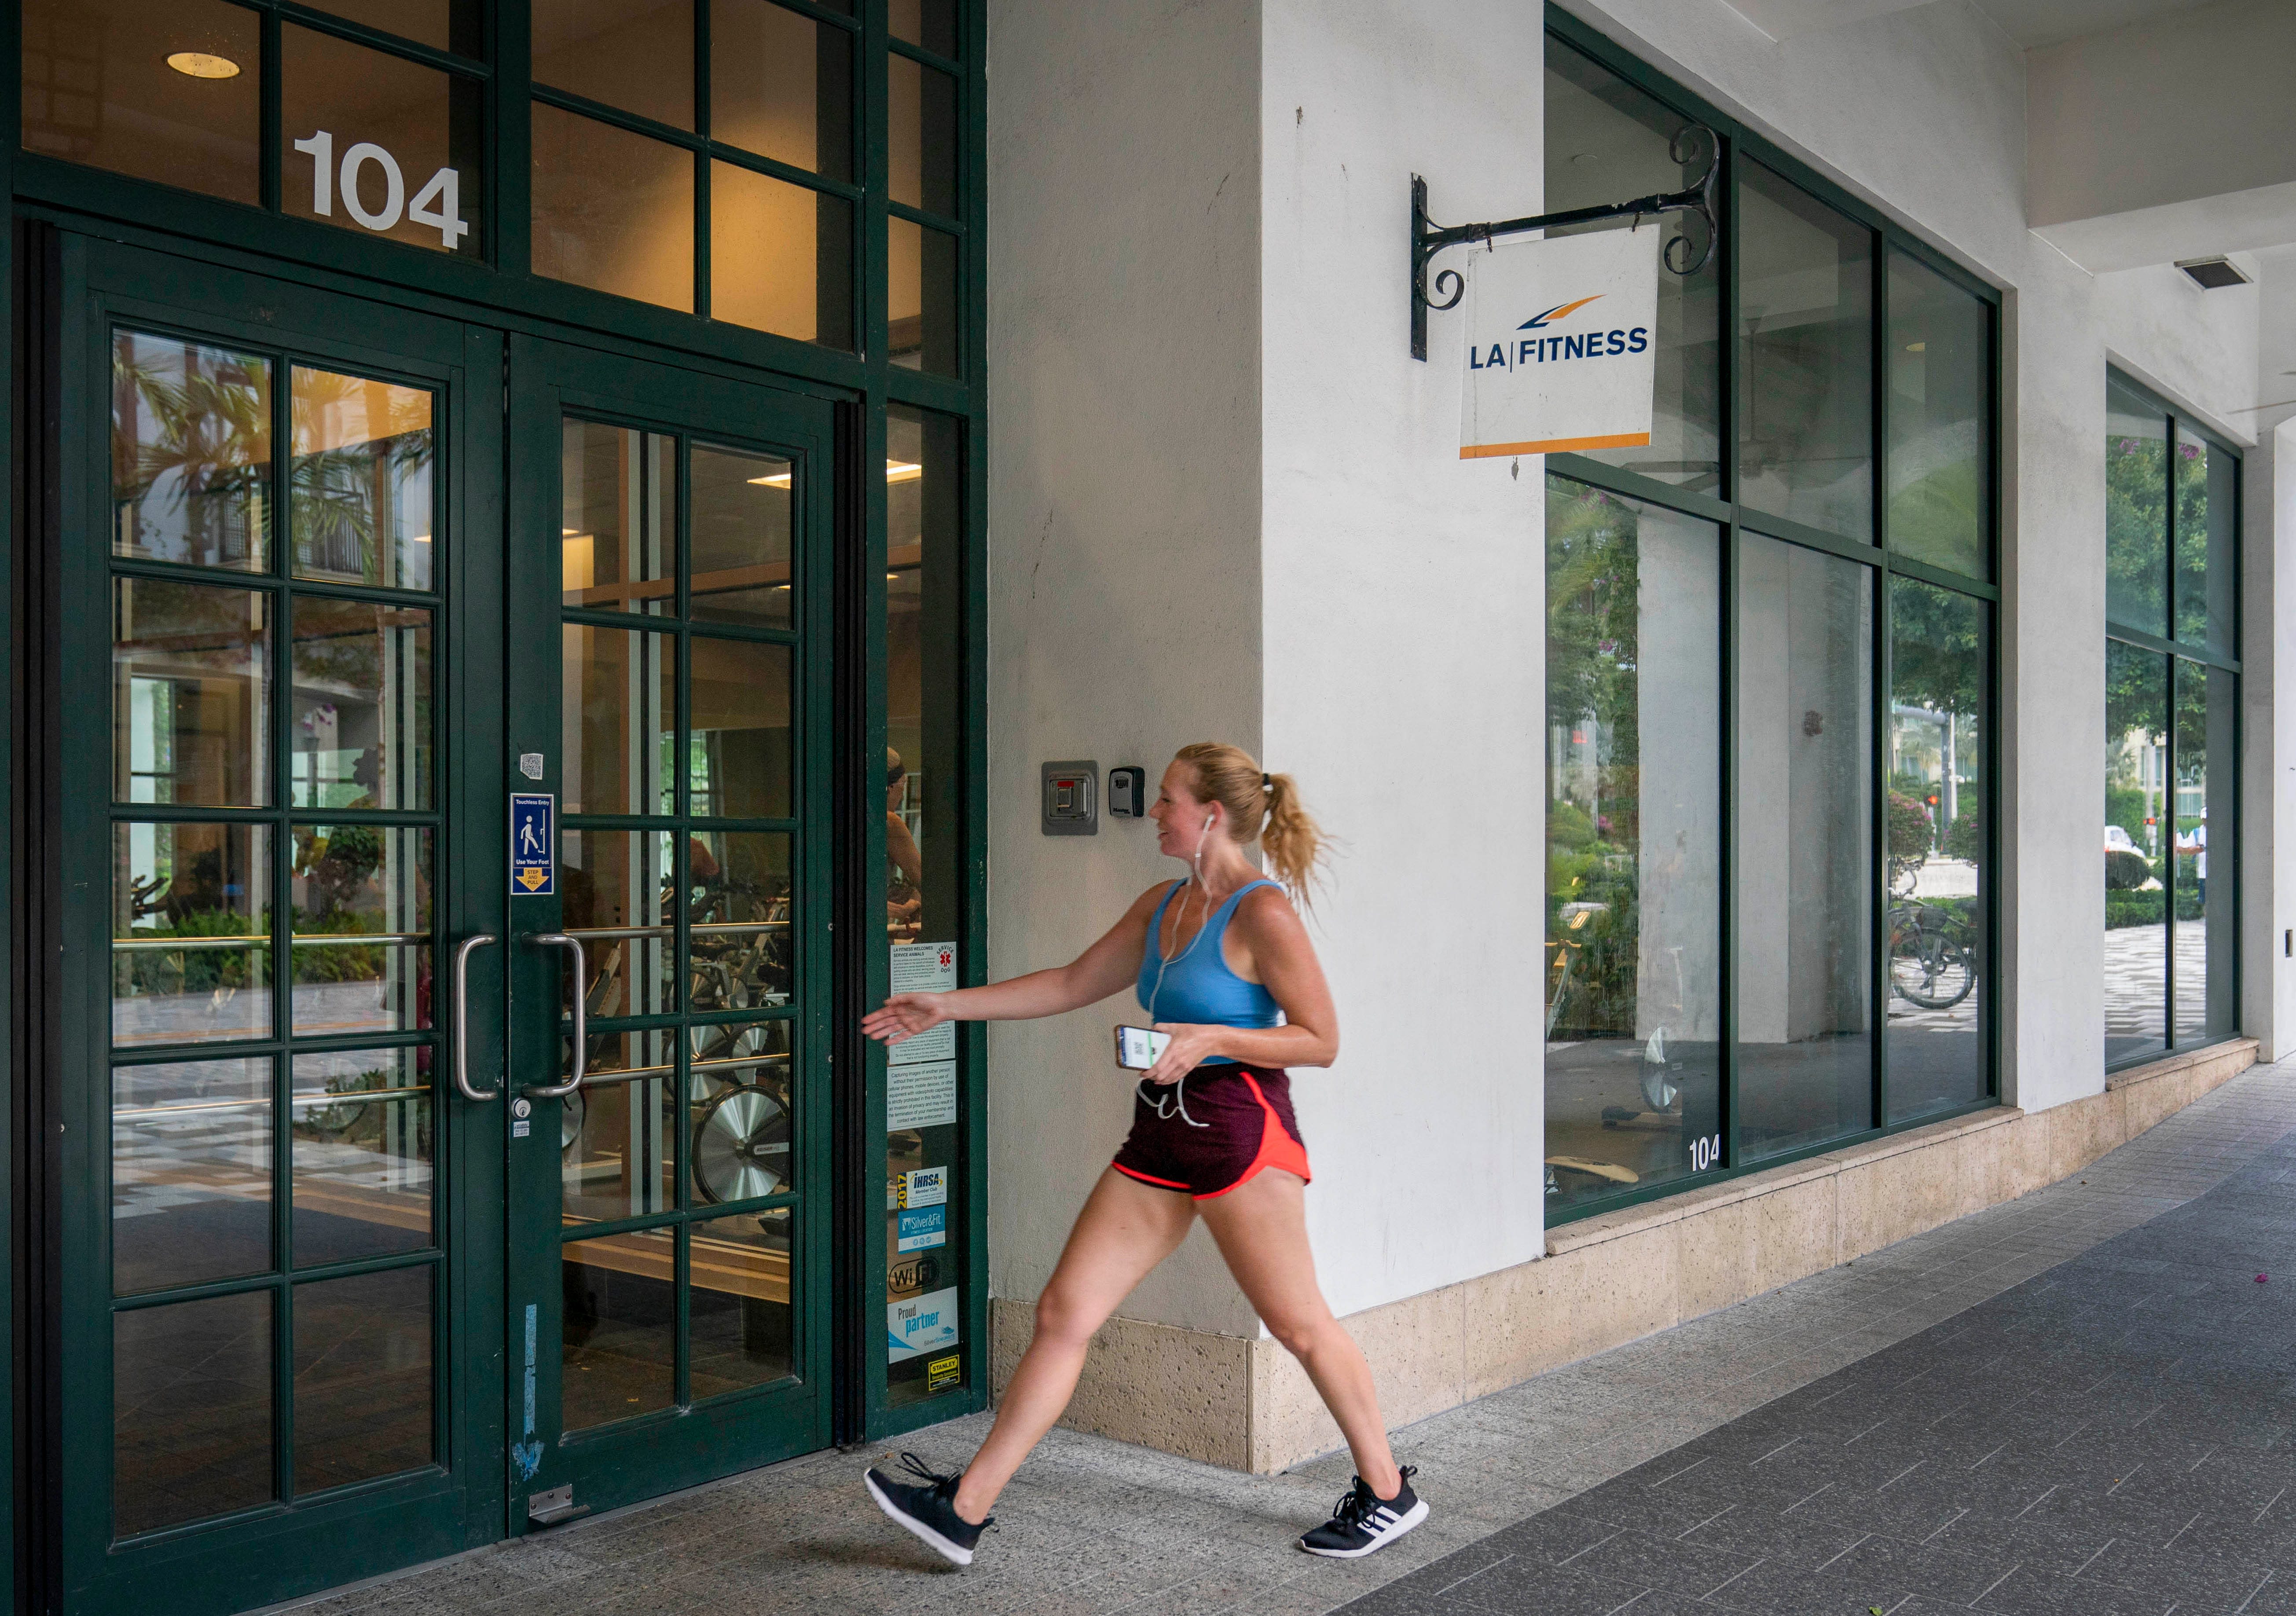 LA Fitness to shut down at CityPlace amid resolution of gym spat with Related Cos.